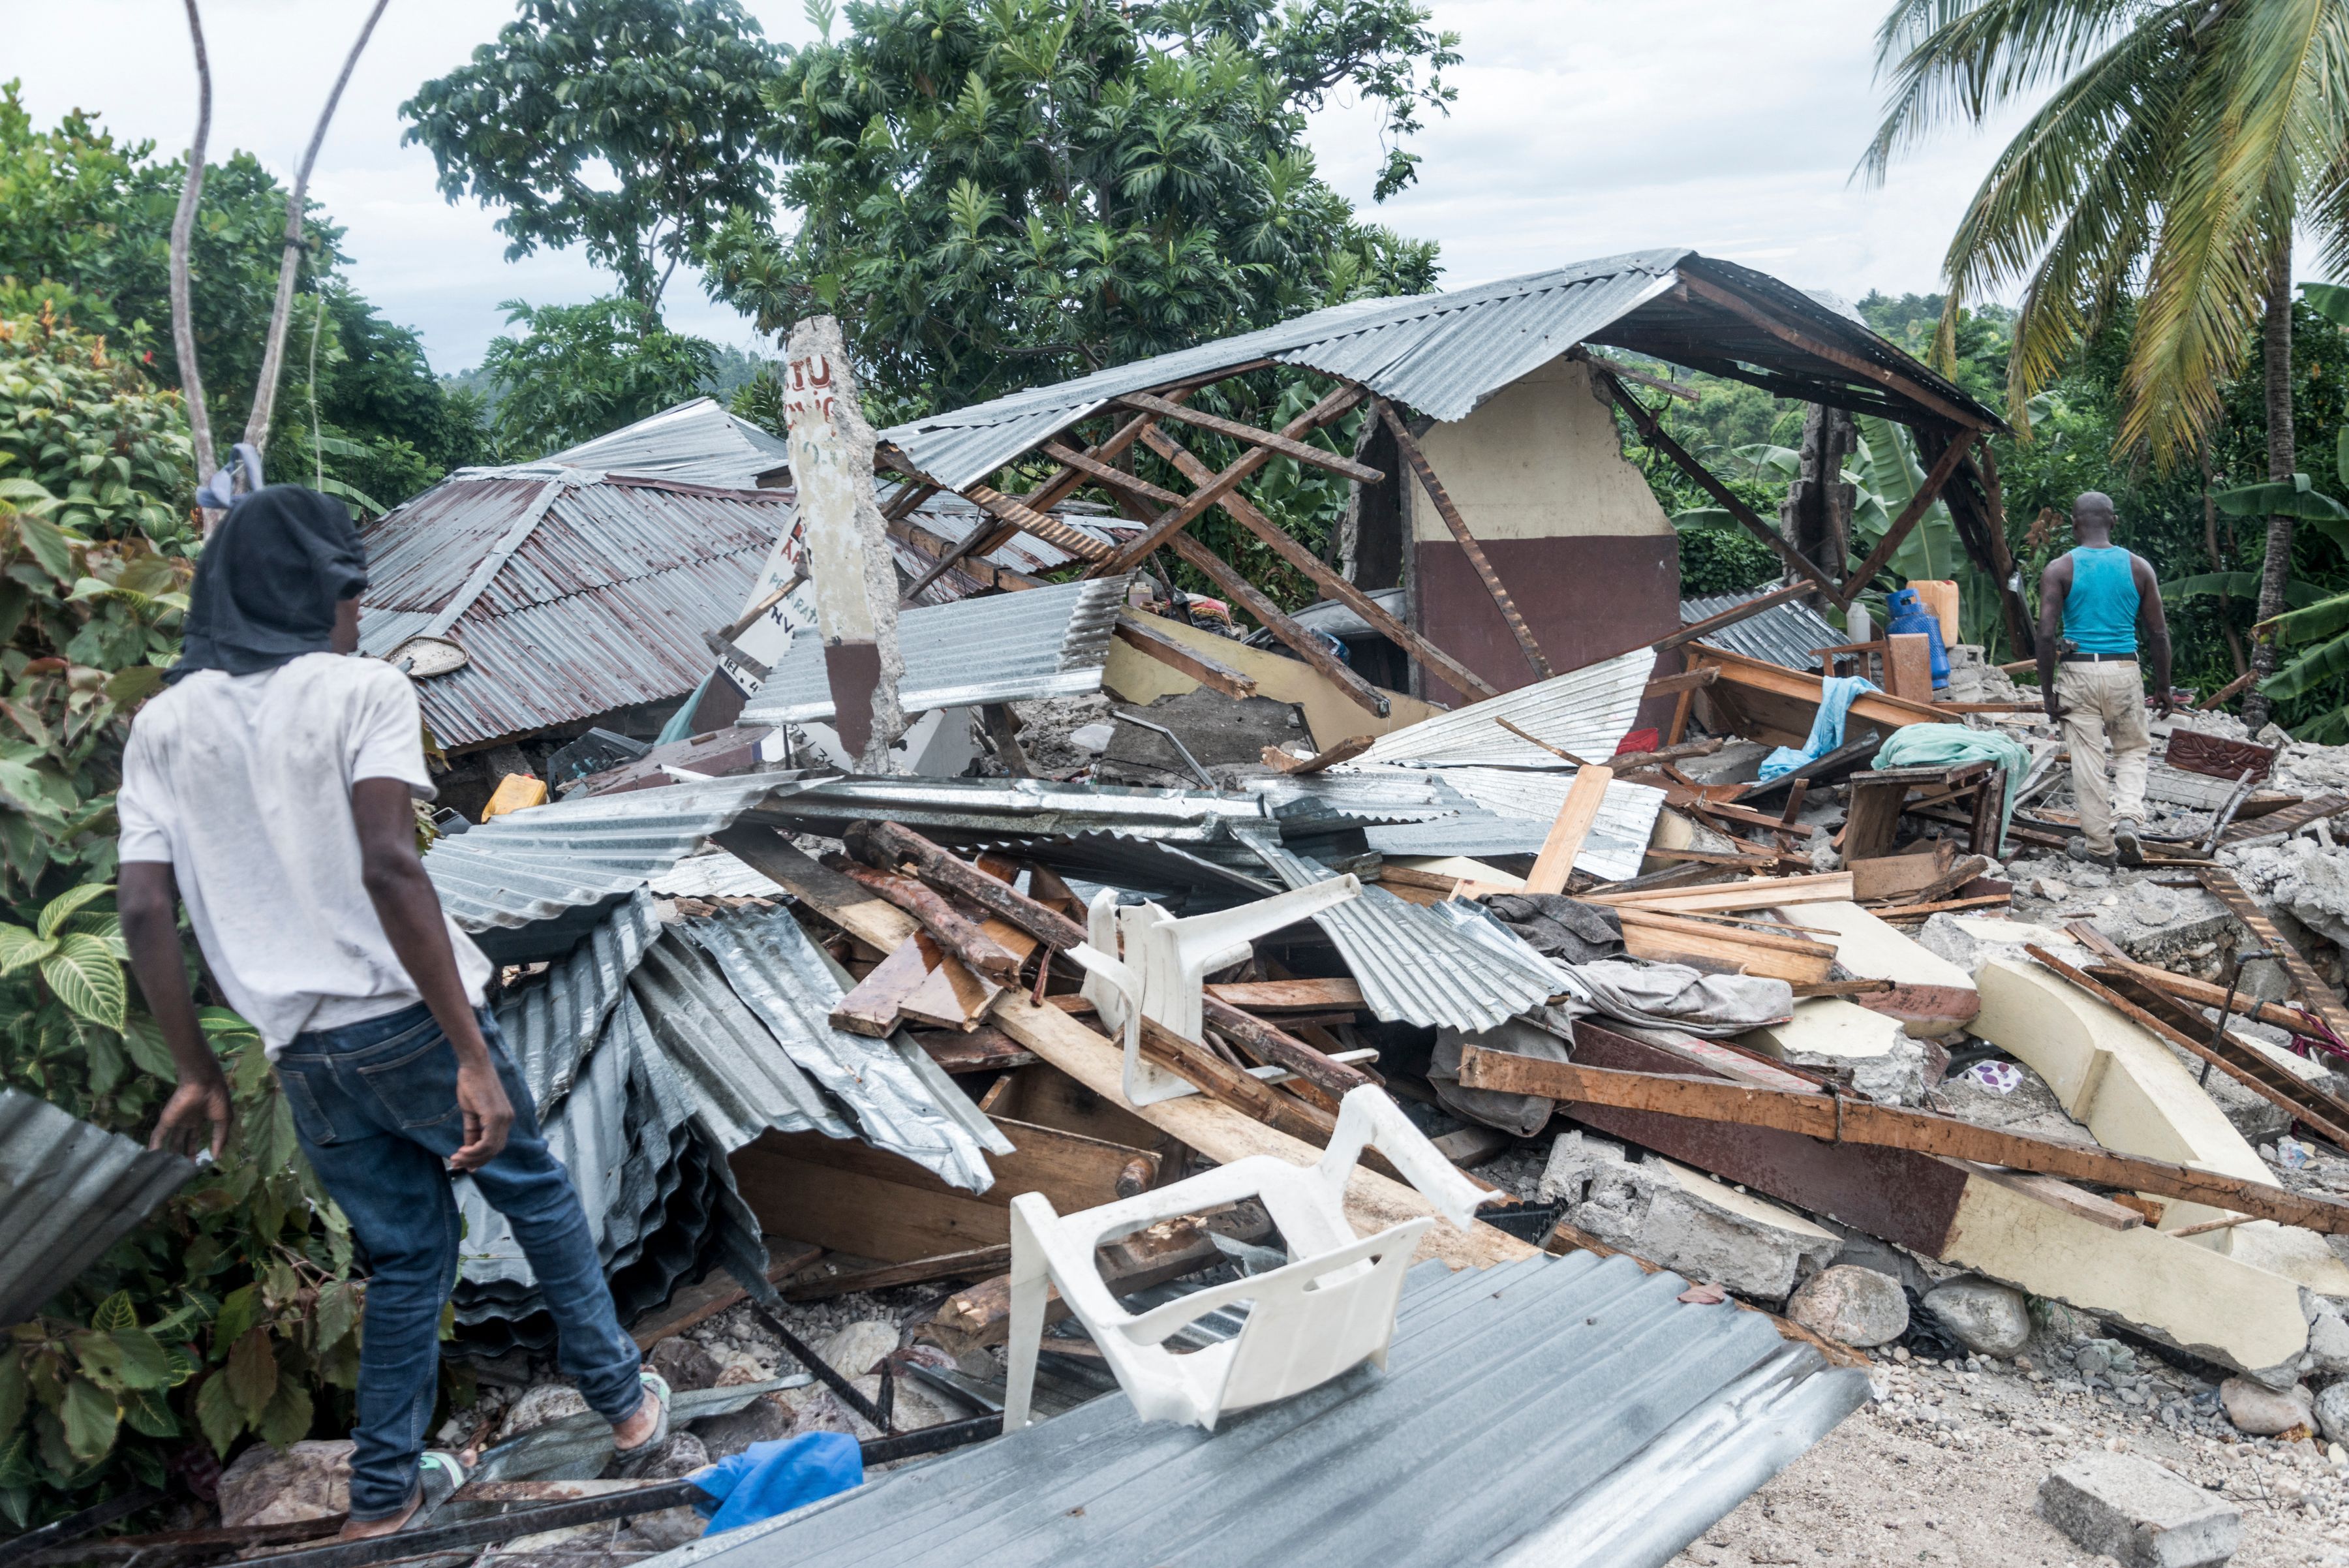 A destroyed home is viewed after the earthquake near Camp-Perrin, Haiti